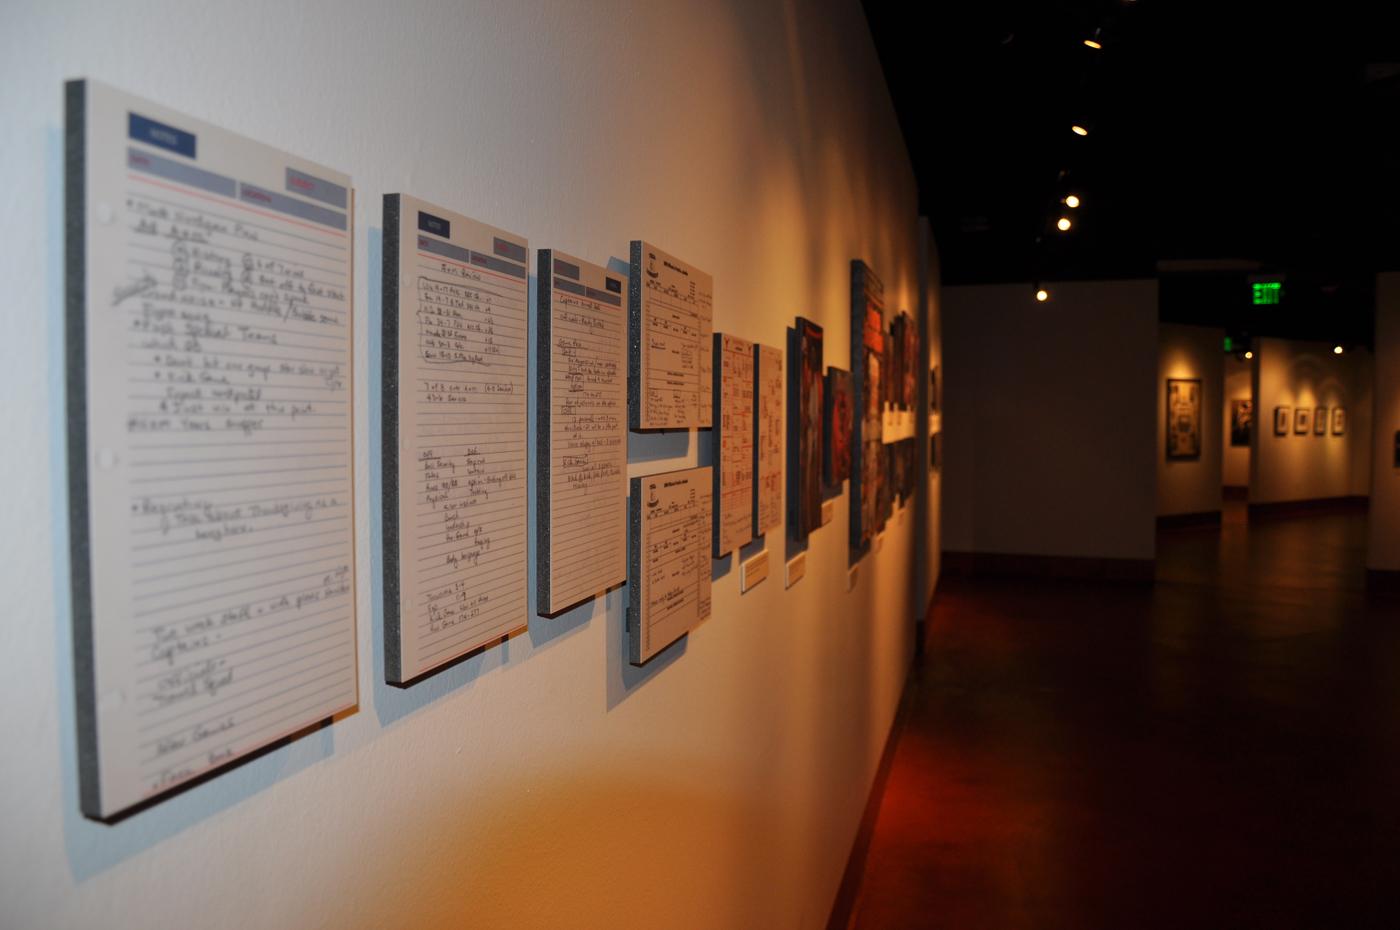 Pages from Mack Brown's game planner on display.